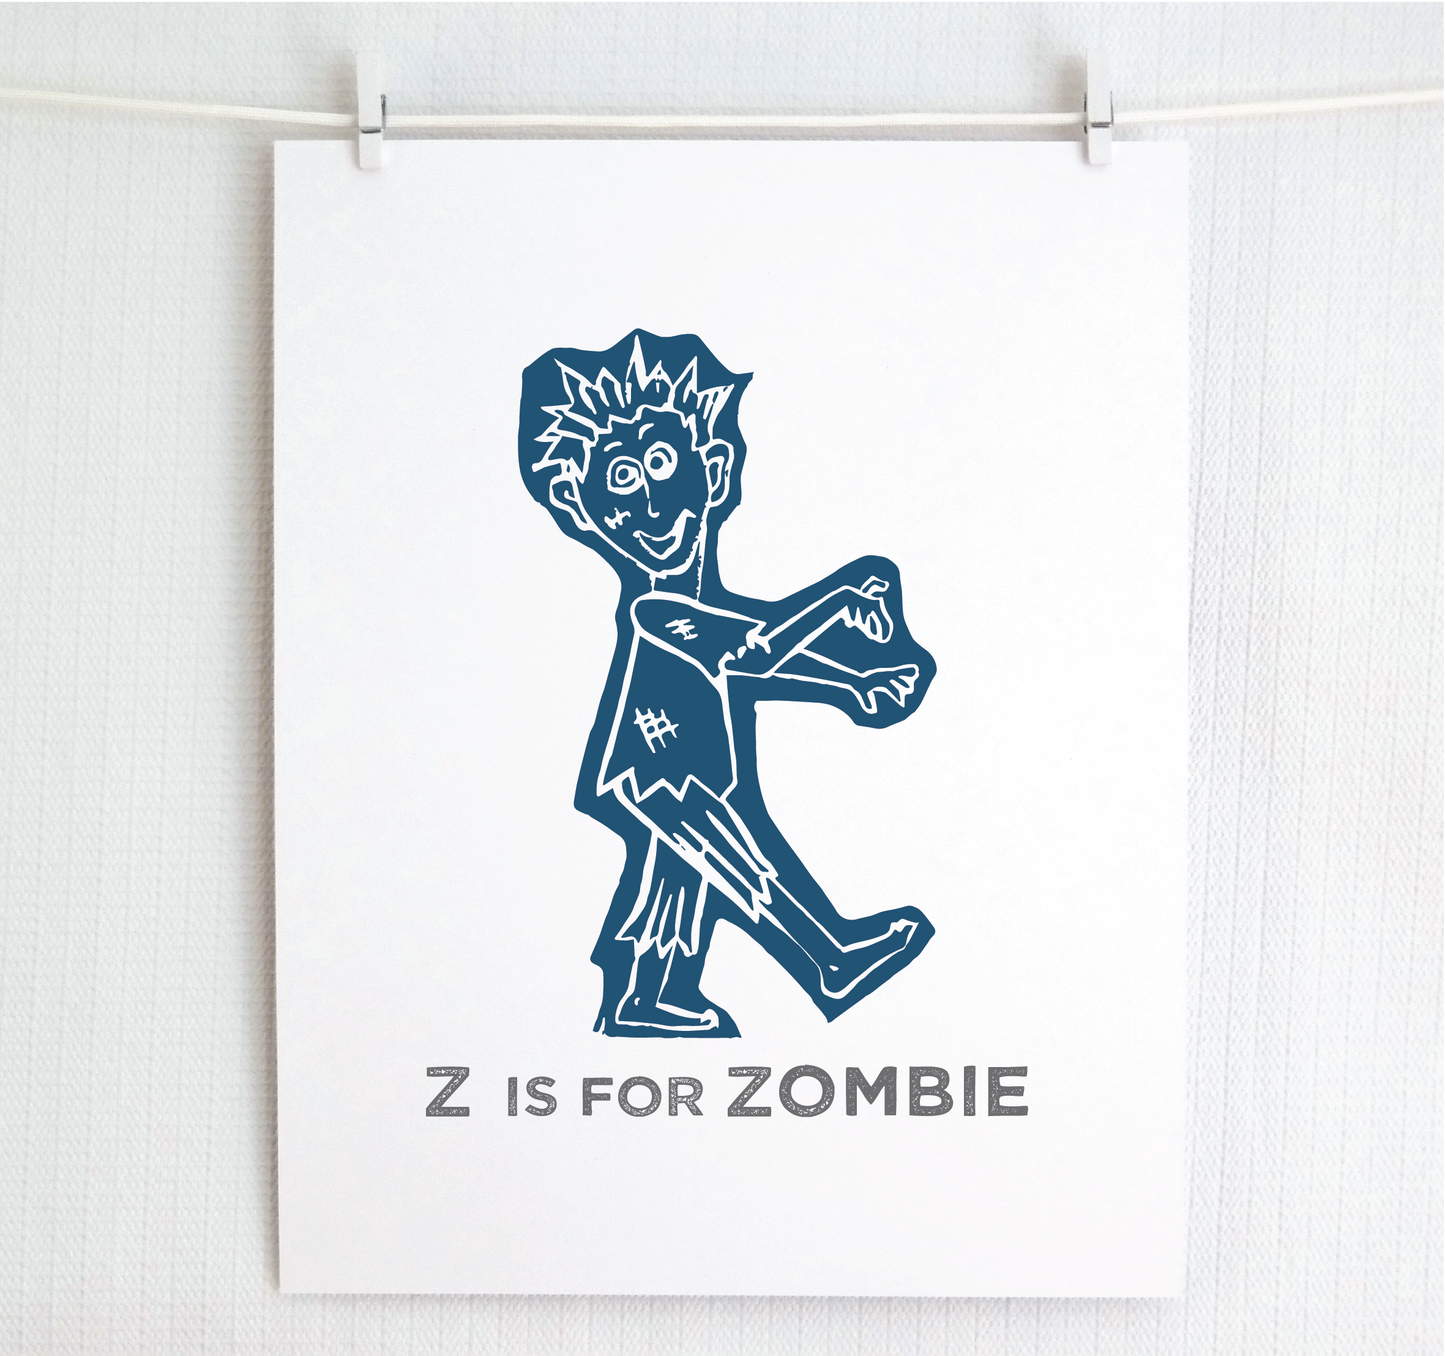 Z is for Zombie